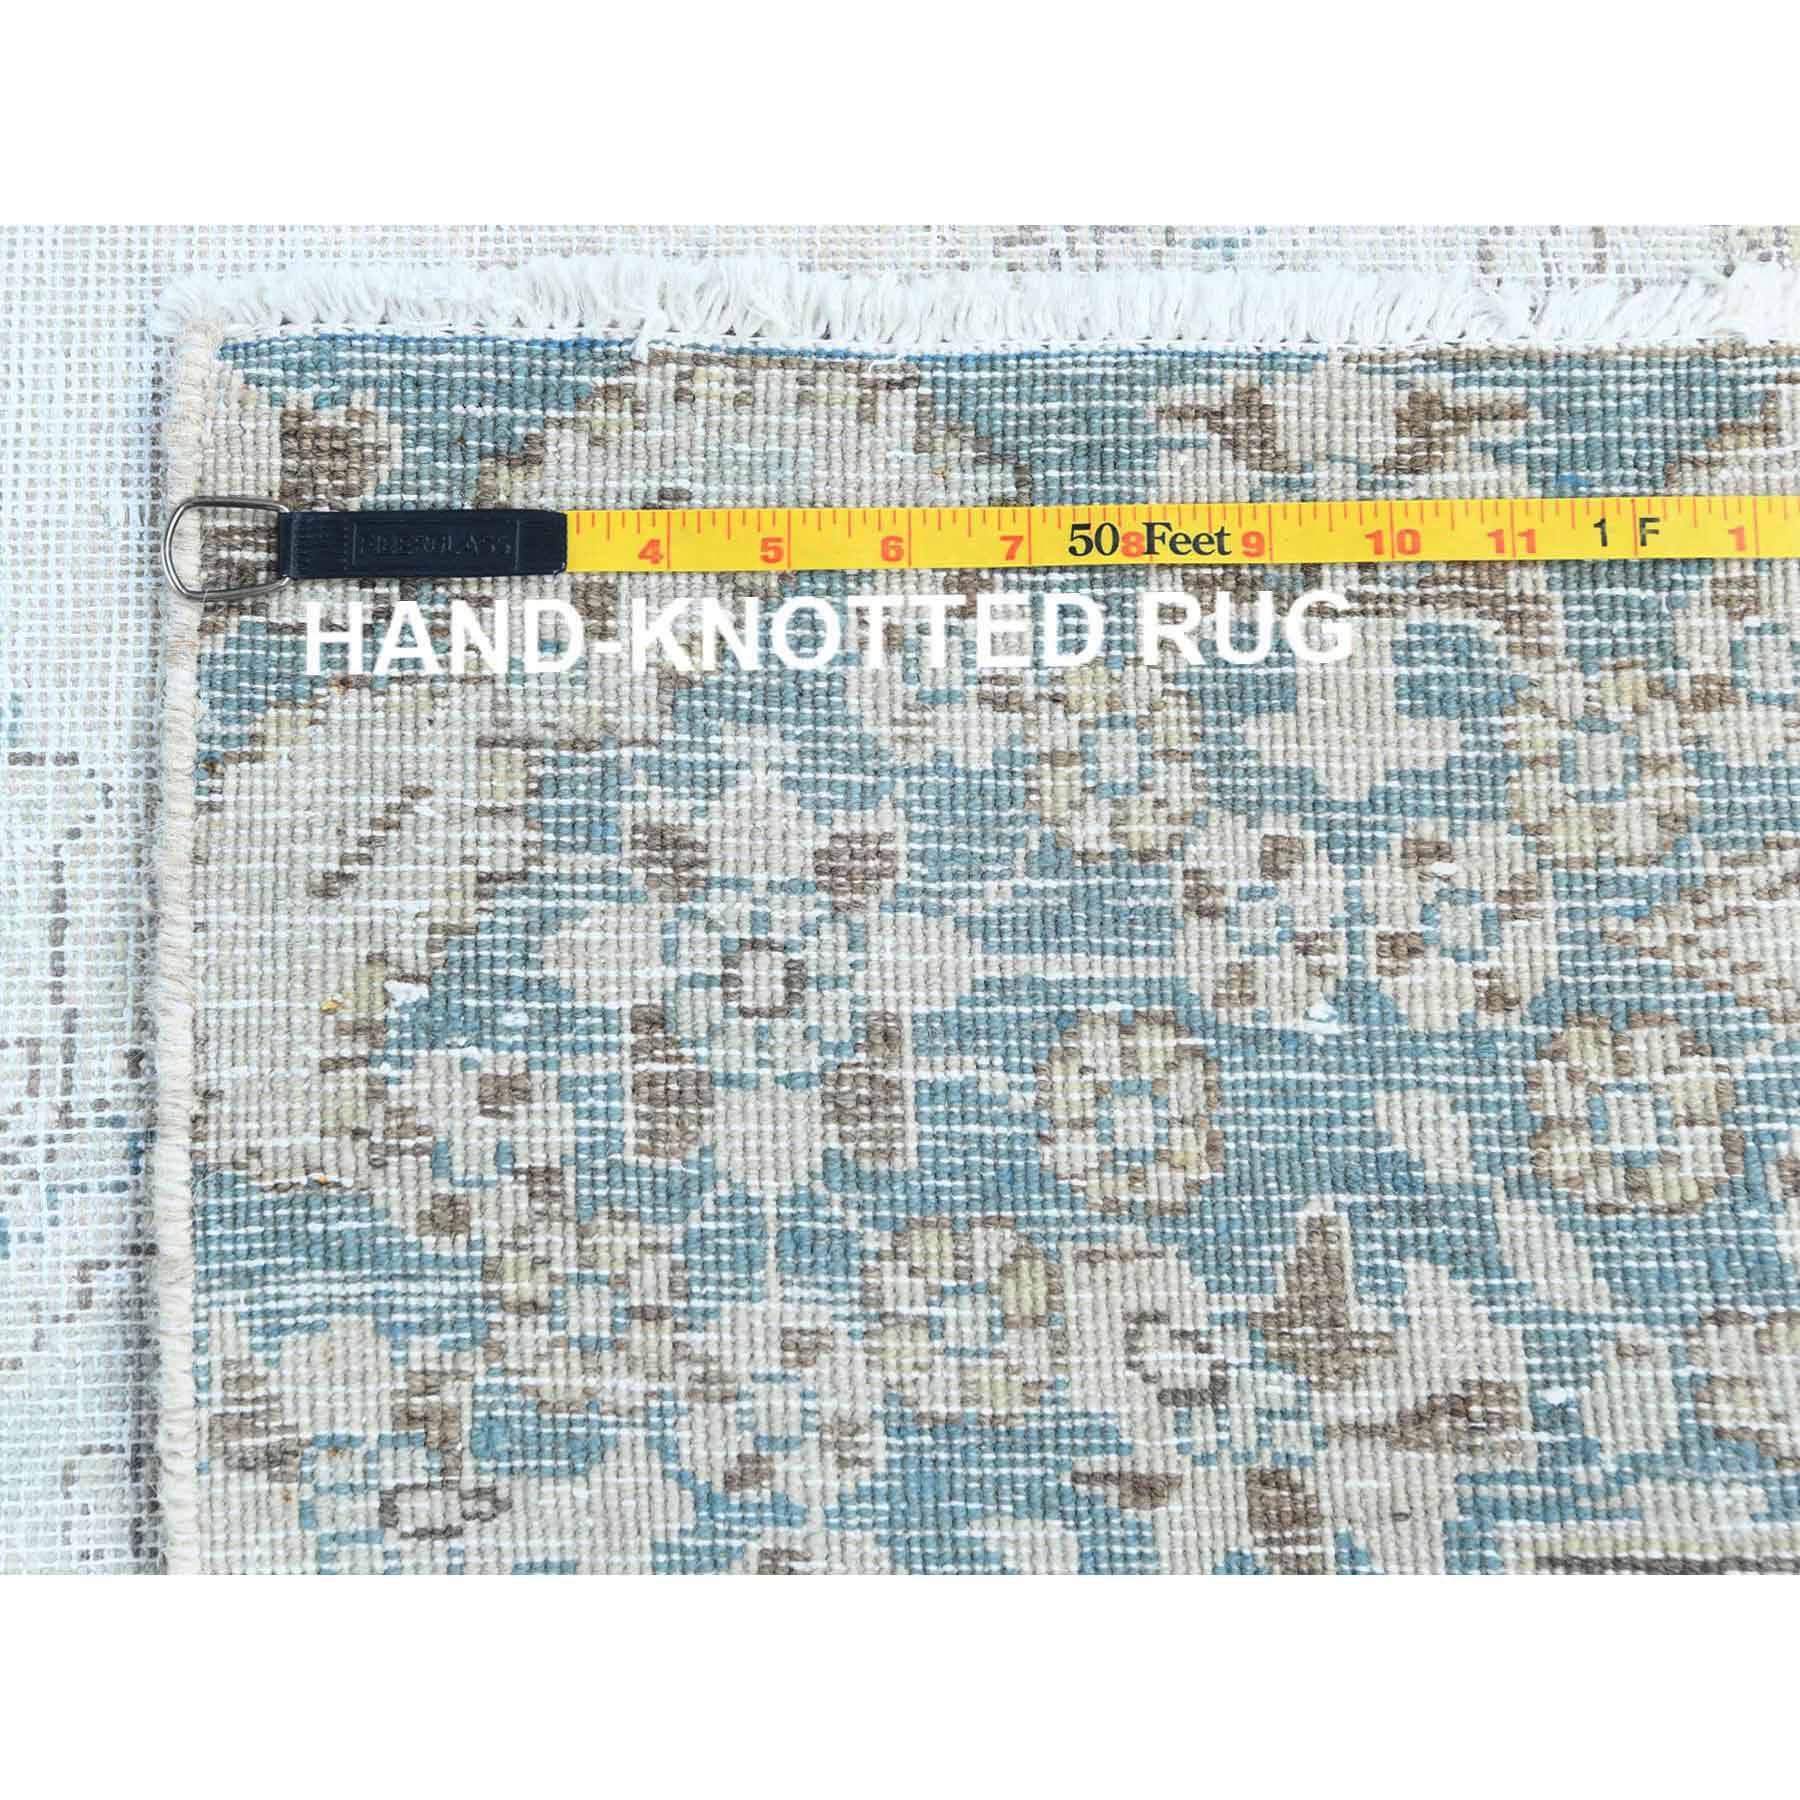 Overdyed-Vintage-Hand-Knotted-Rug-308950